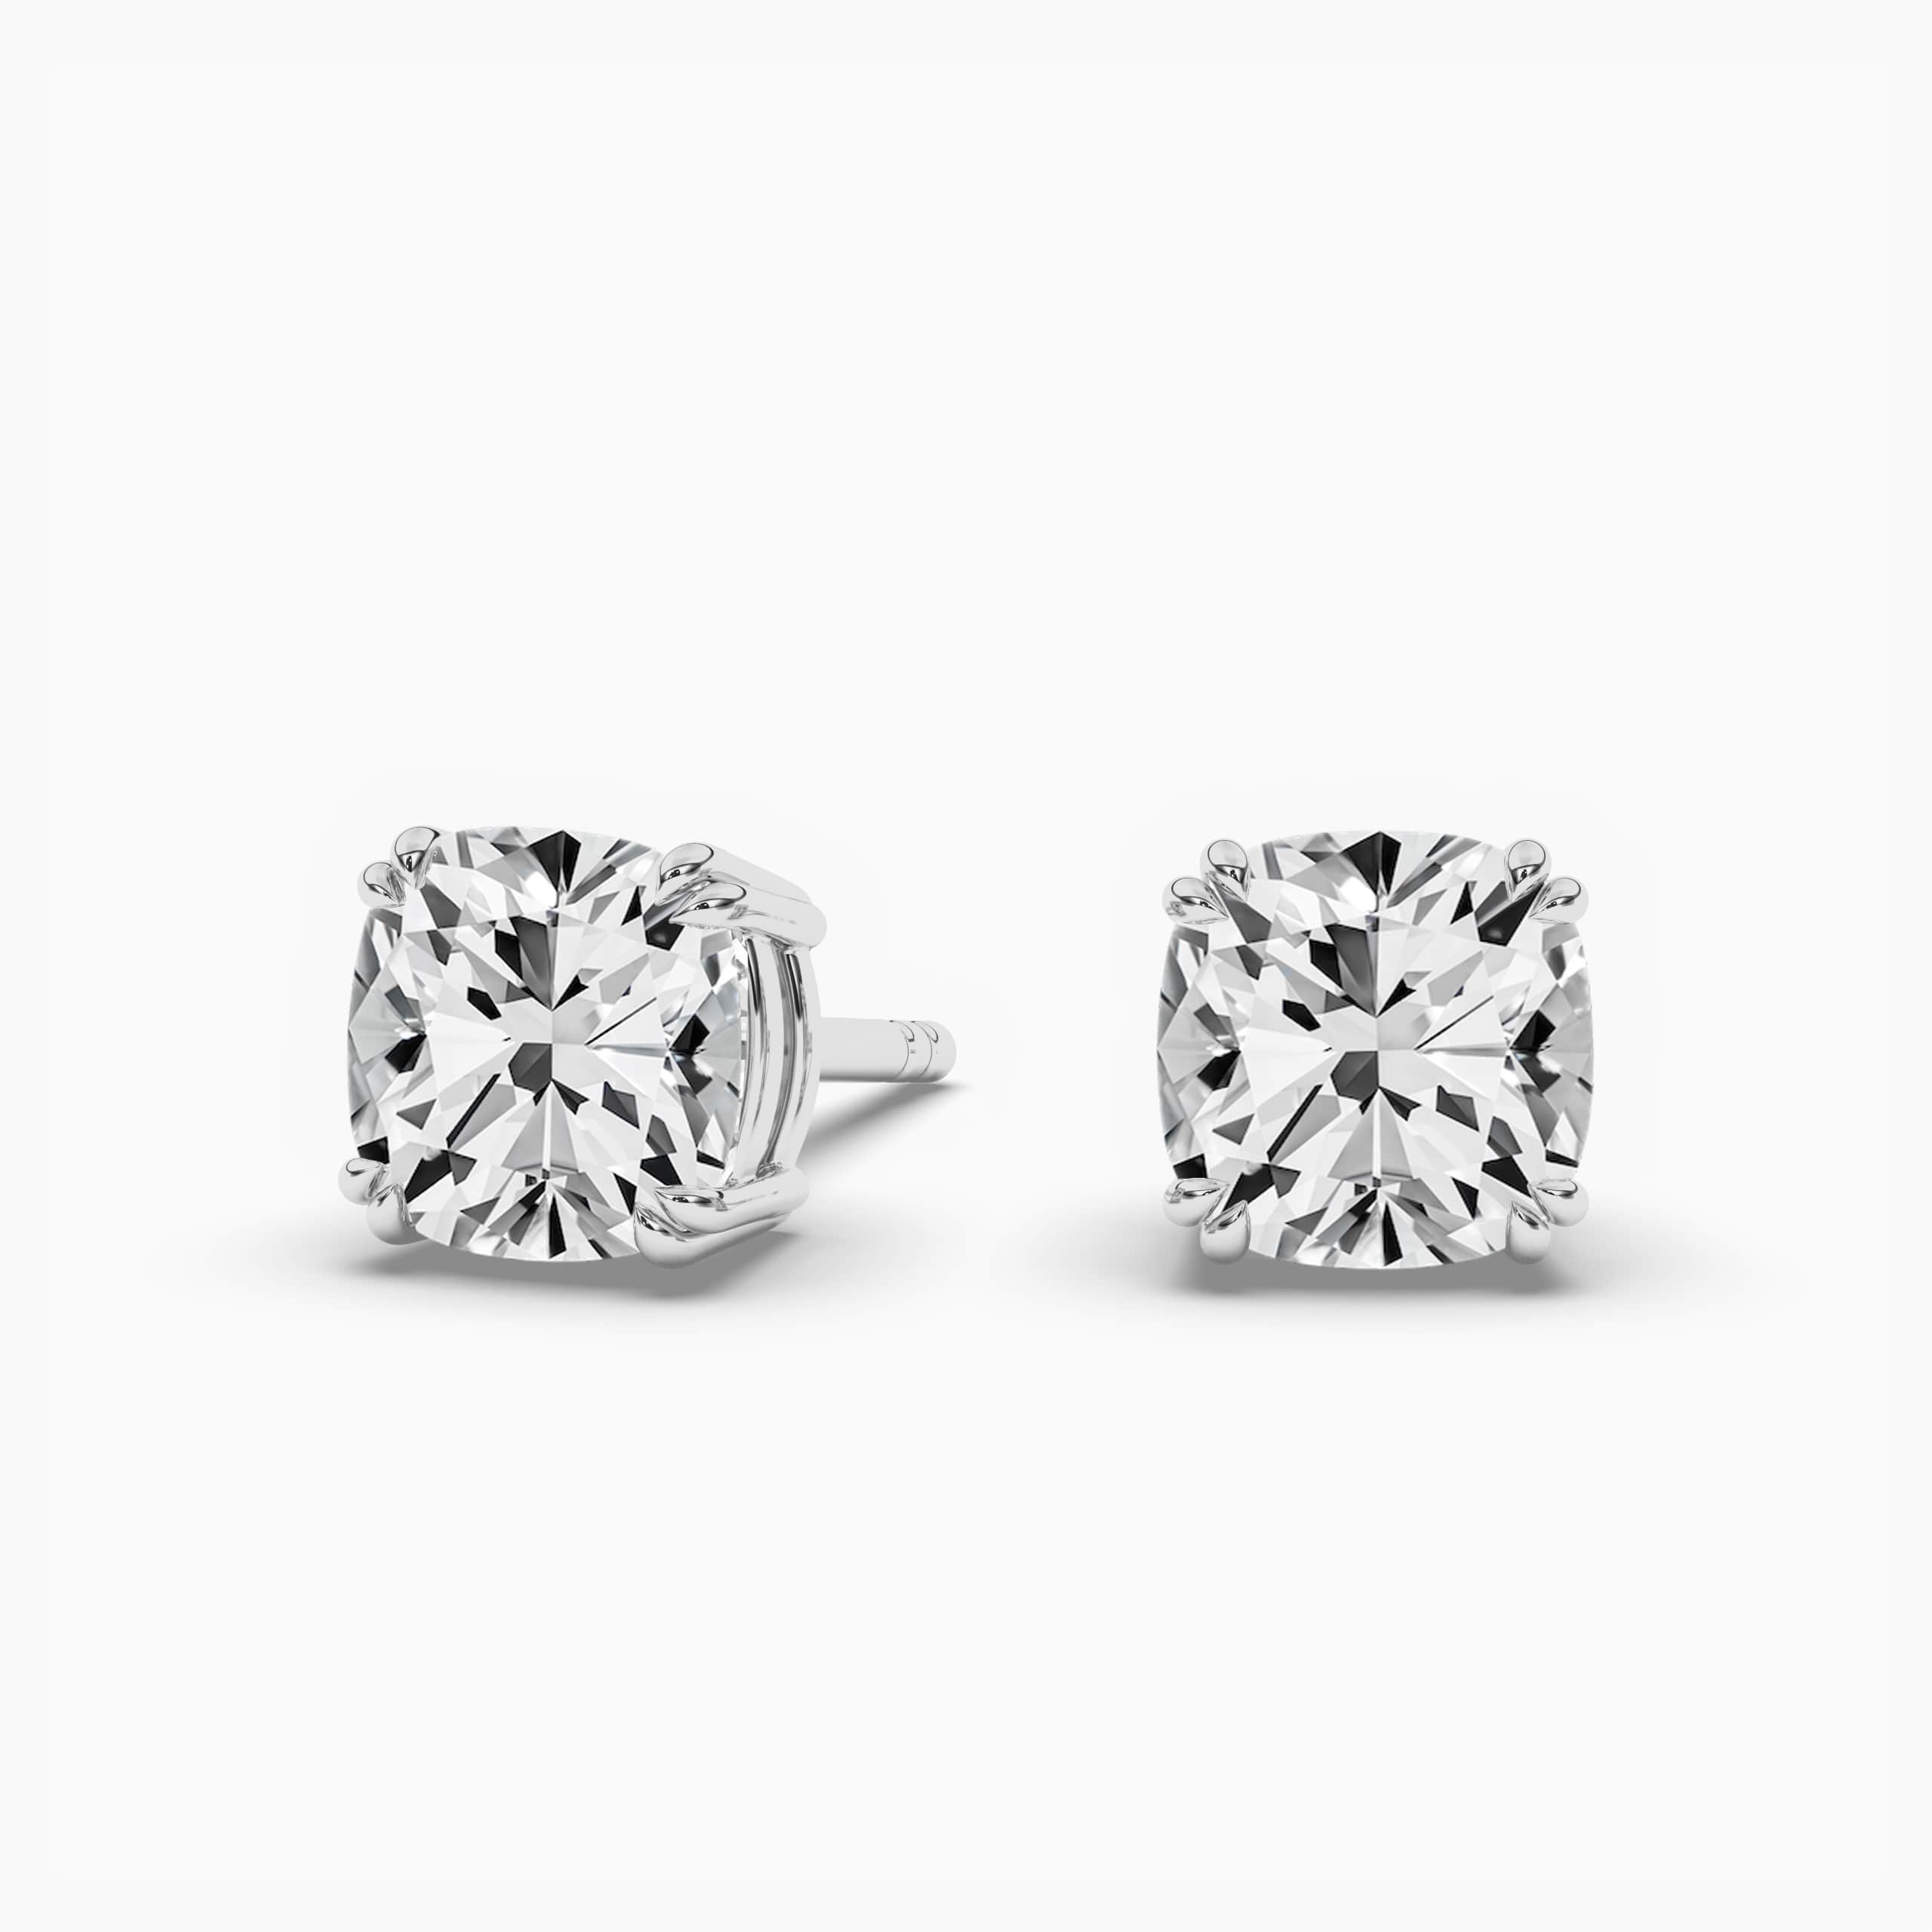 CUSHION CUT ENGAGEMENT RINGS FROM ADIAMOR ARE WHITE GOLD